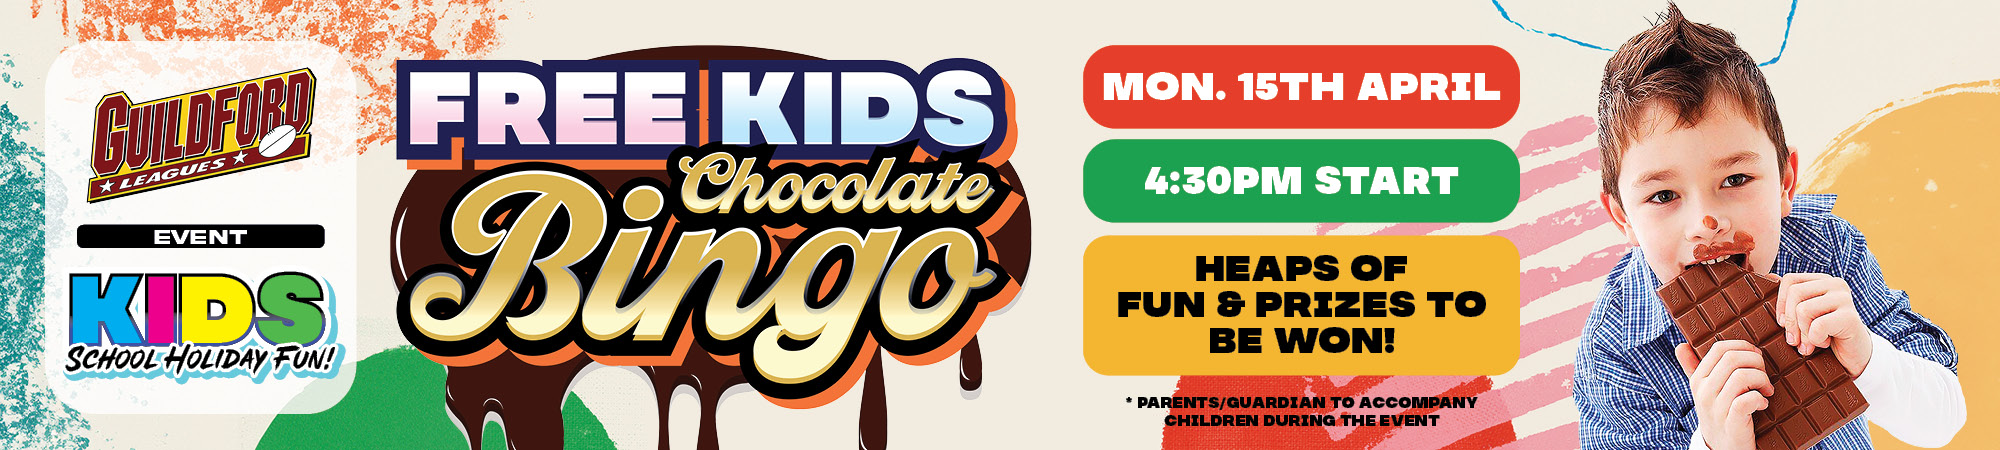 Free Kids Chocolate Bingo at Guildford Leagues